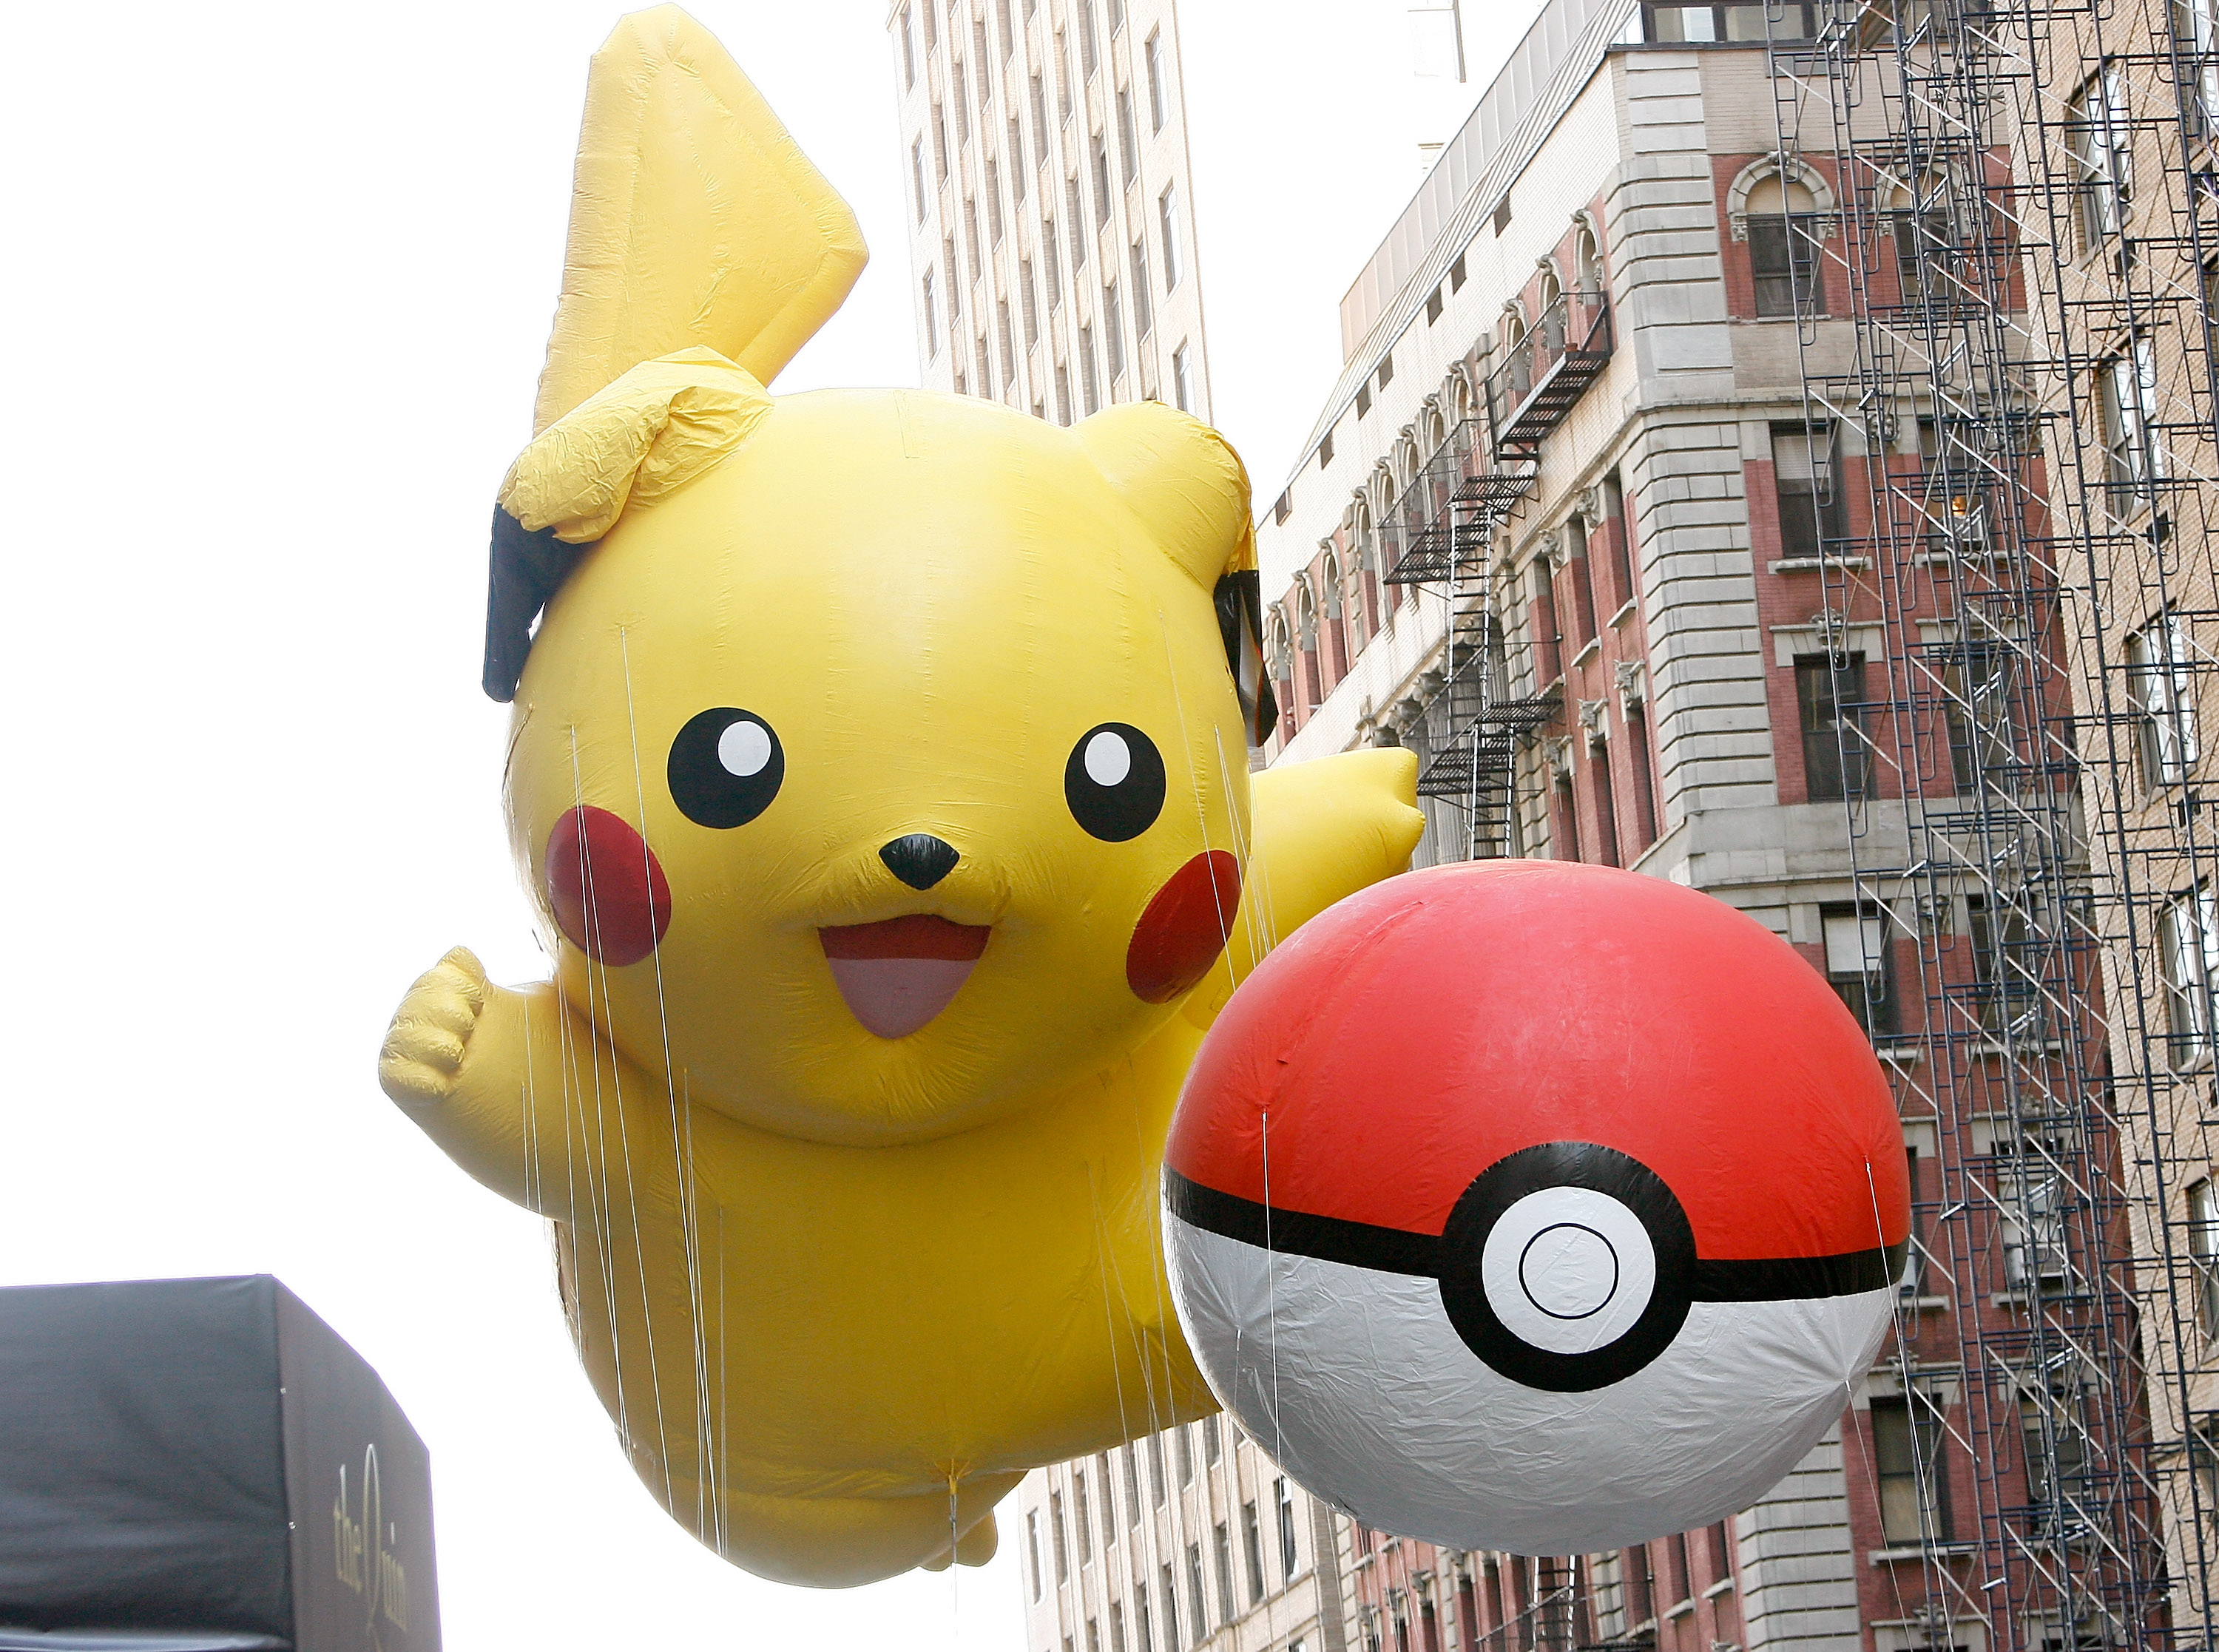 The Pikachu Pokemon balloons are seen during the 86th Annual Macy's Thanksgiving Day Parade (Mike Lawrie—Getty Images)